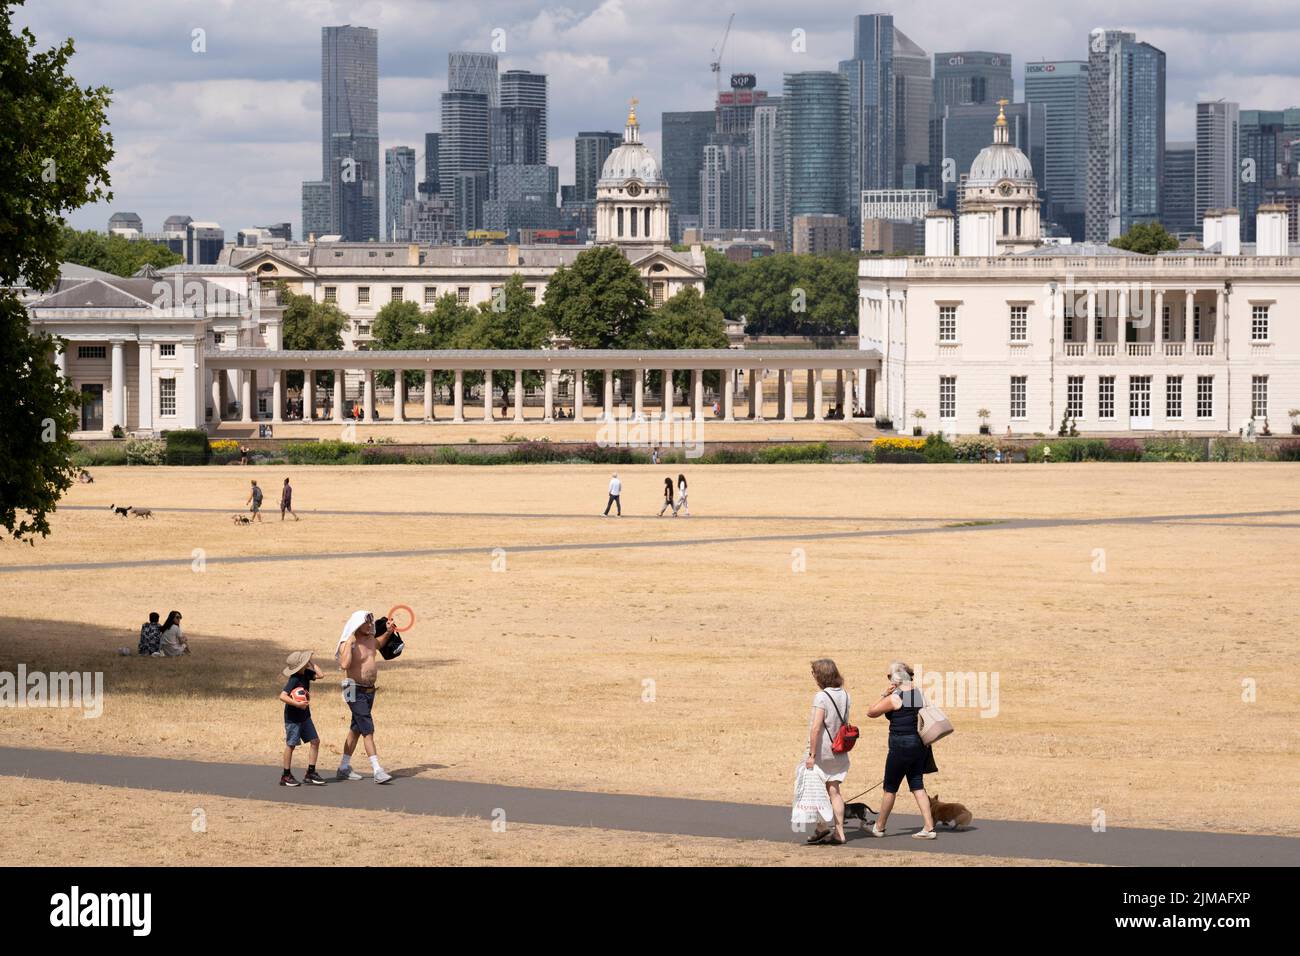 Overlooked by the former royal residence, Queen's House, park users walk through a parched grass landscape in Greenwich Park as the UK's heatwave and drought continues into August with little rain having fallen in London and south-east England, on 4th August 2022, in London, England. Queen's House is a former royal residence built between 1616 and 1635 near Greenwich Palace. Stock Photo